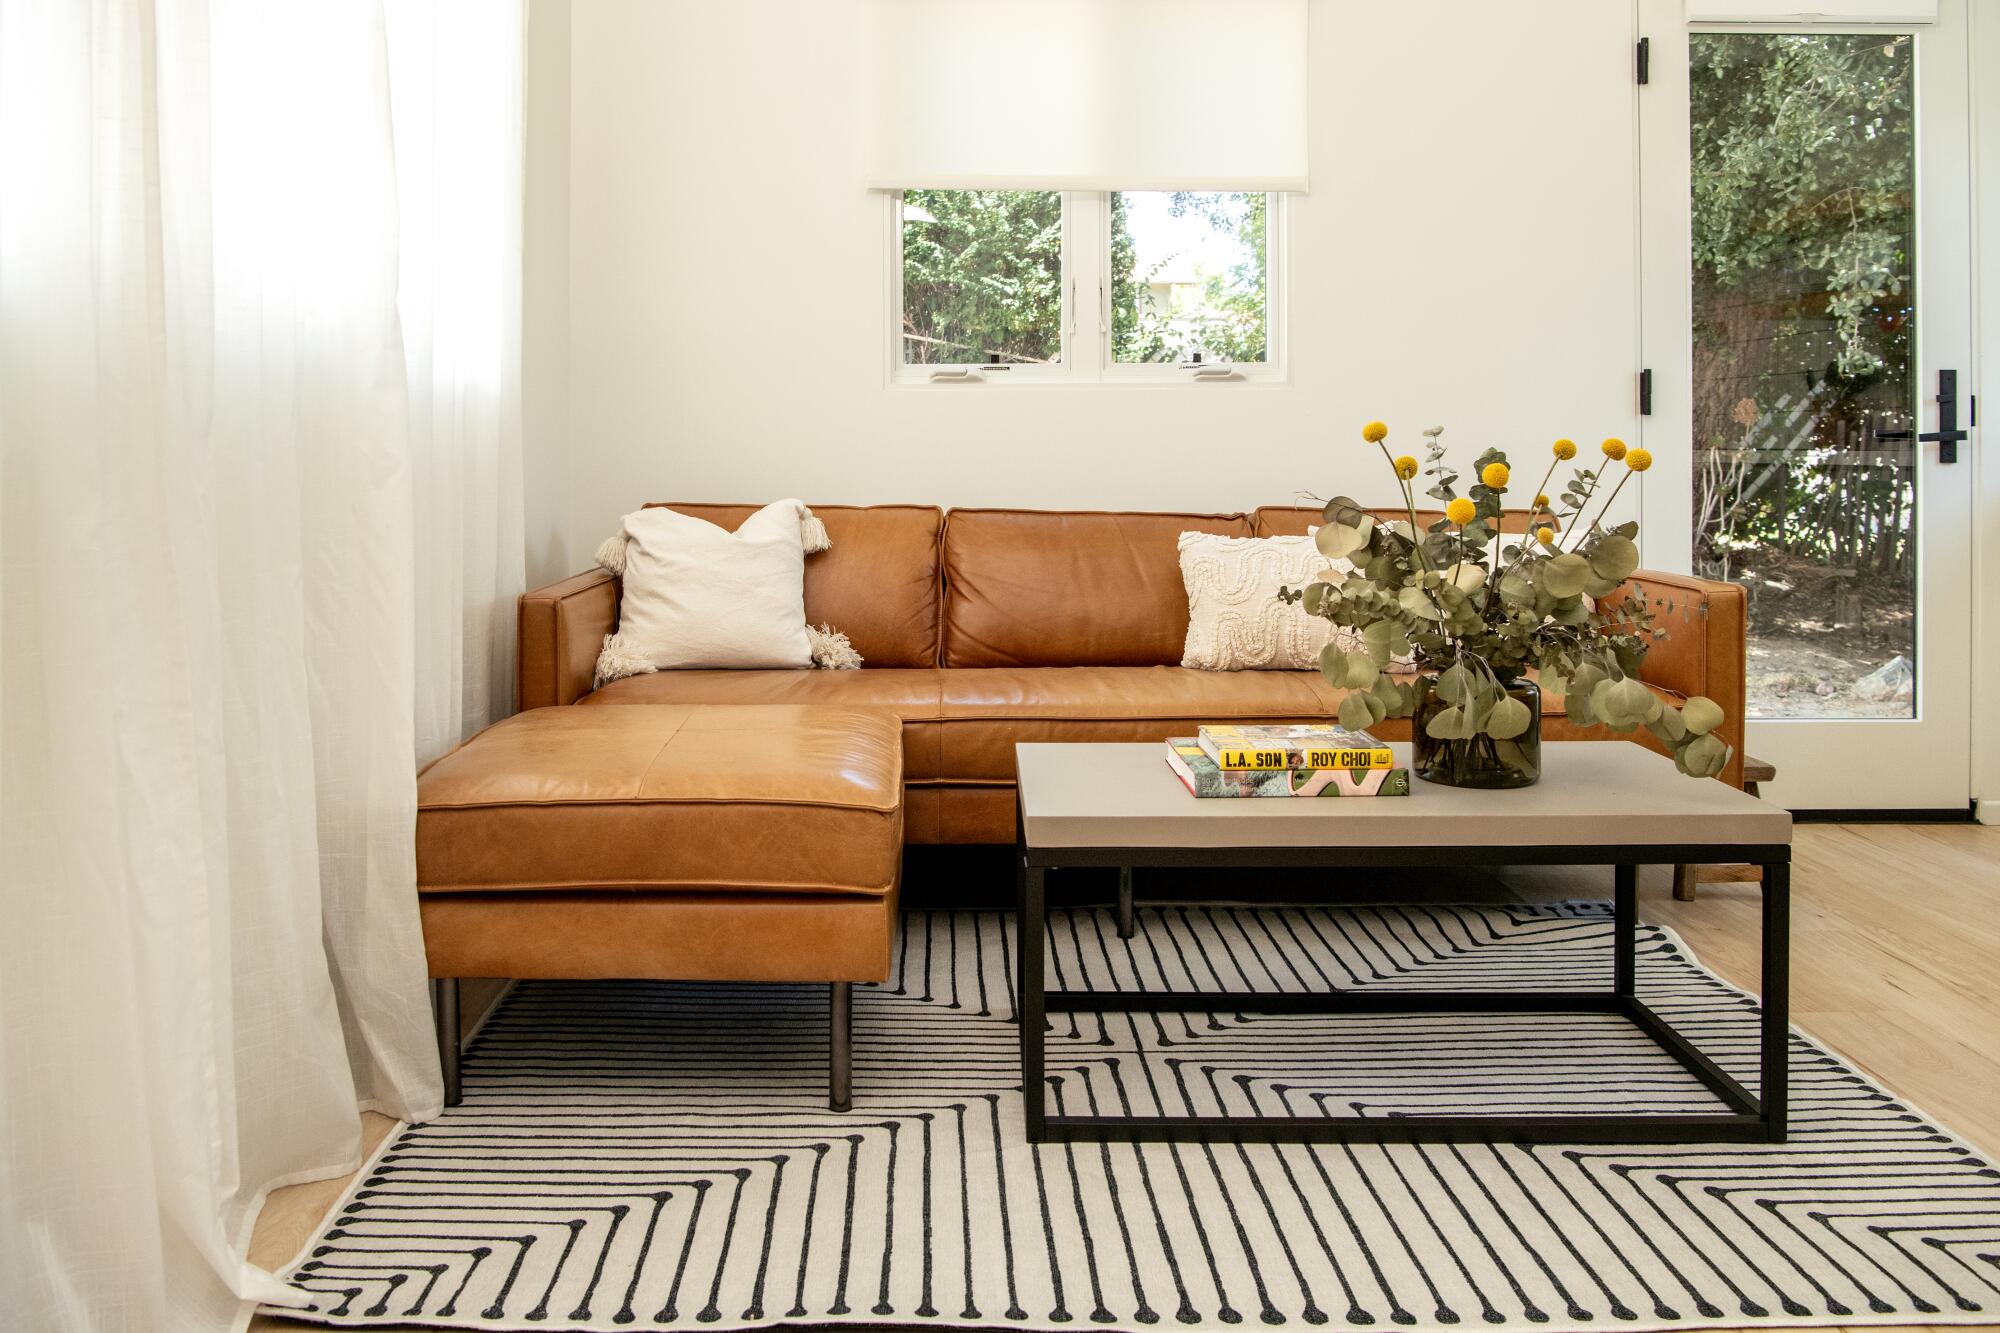 A black and white striped rug, brown leather couch and modern coffee table accent the ADU's living room.